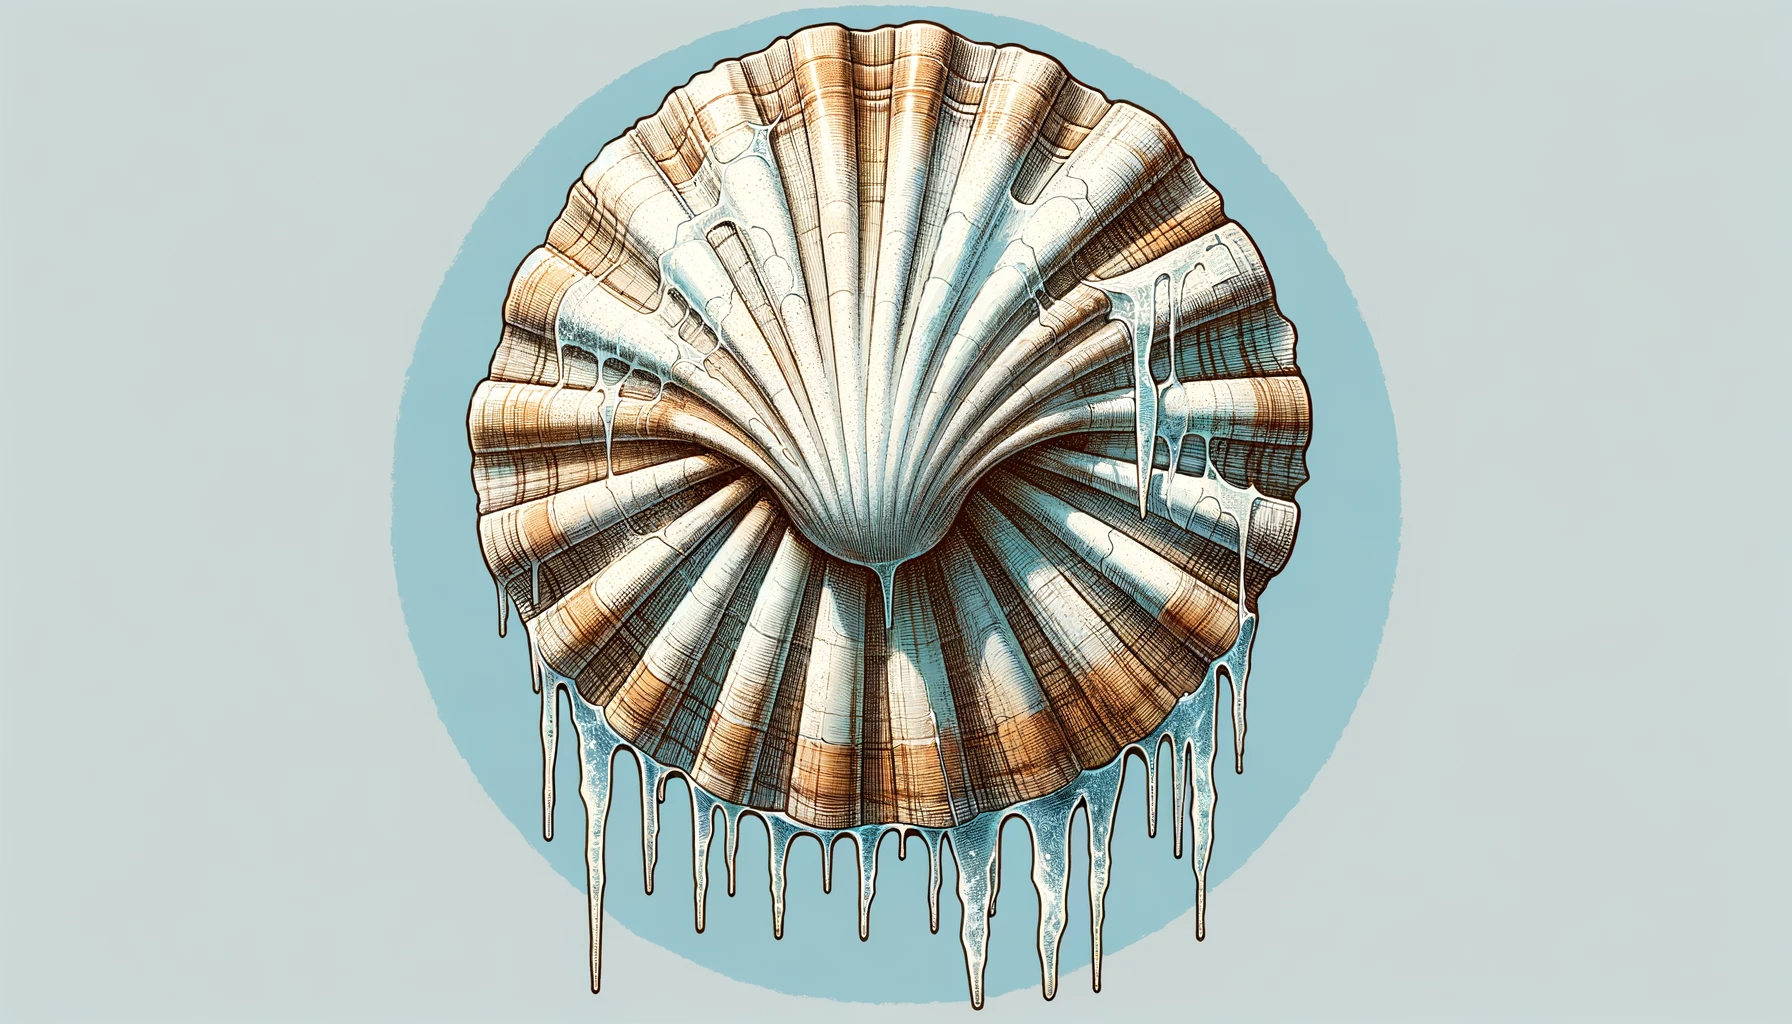 Frozen Scallops With Icicles Hanging Off Set Against A Dark Blue Background